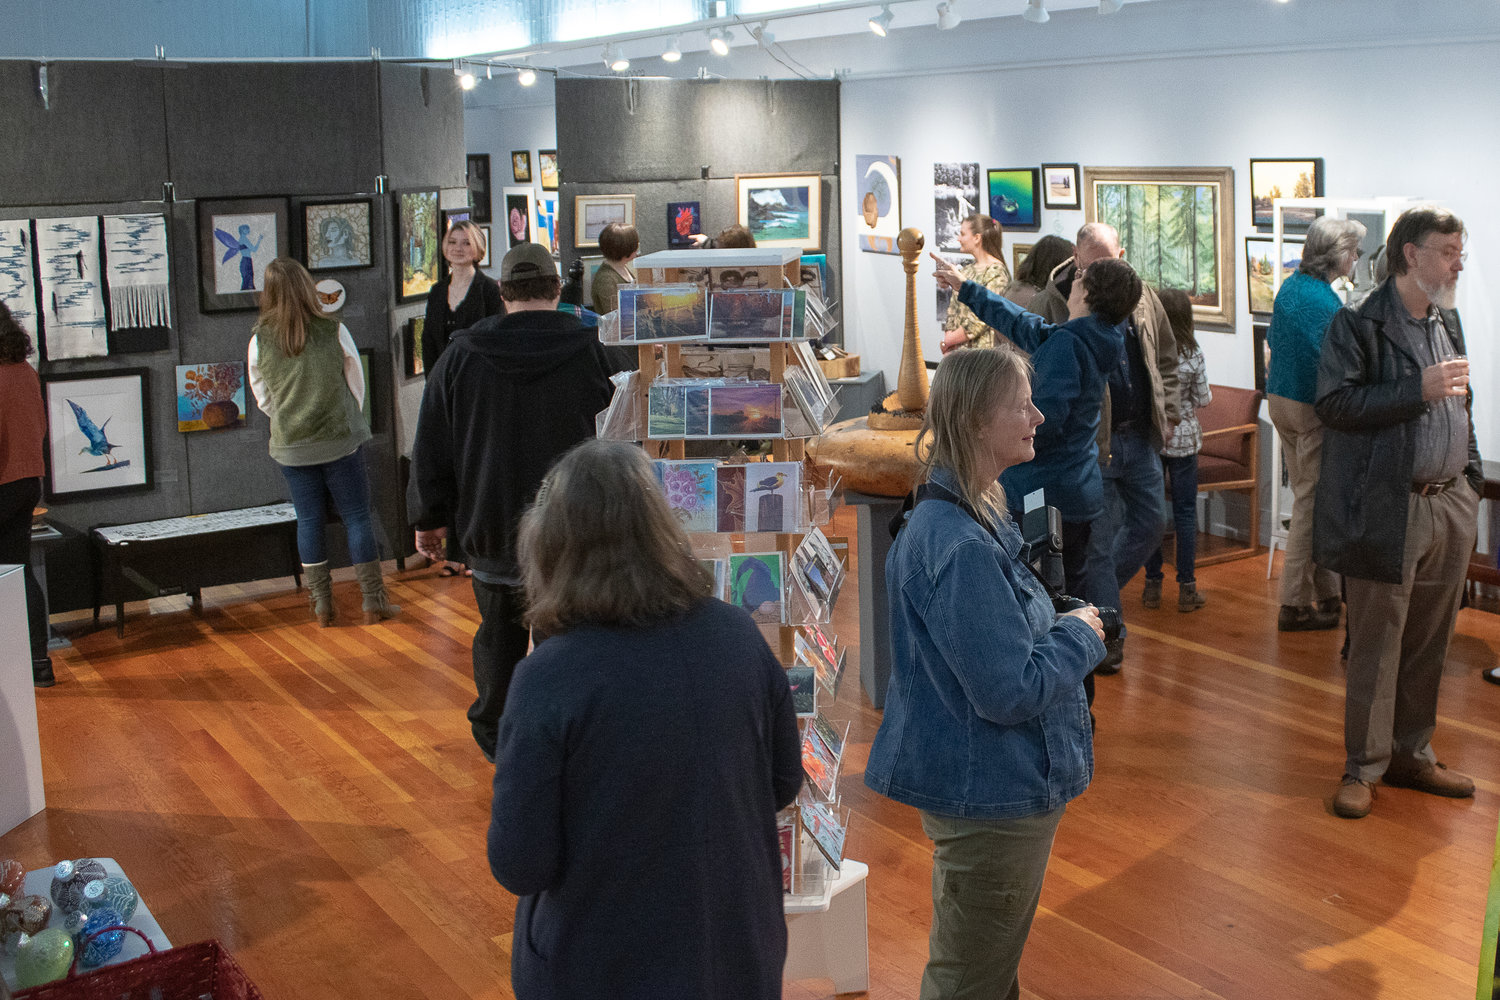 Visitors tour the gallery this past Friday for the emerging artists gala at the Rectangle Gallery & Creative Space located at 209 N. Tower Ave. in downtown Centralia.